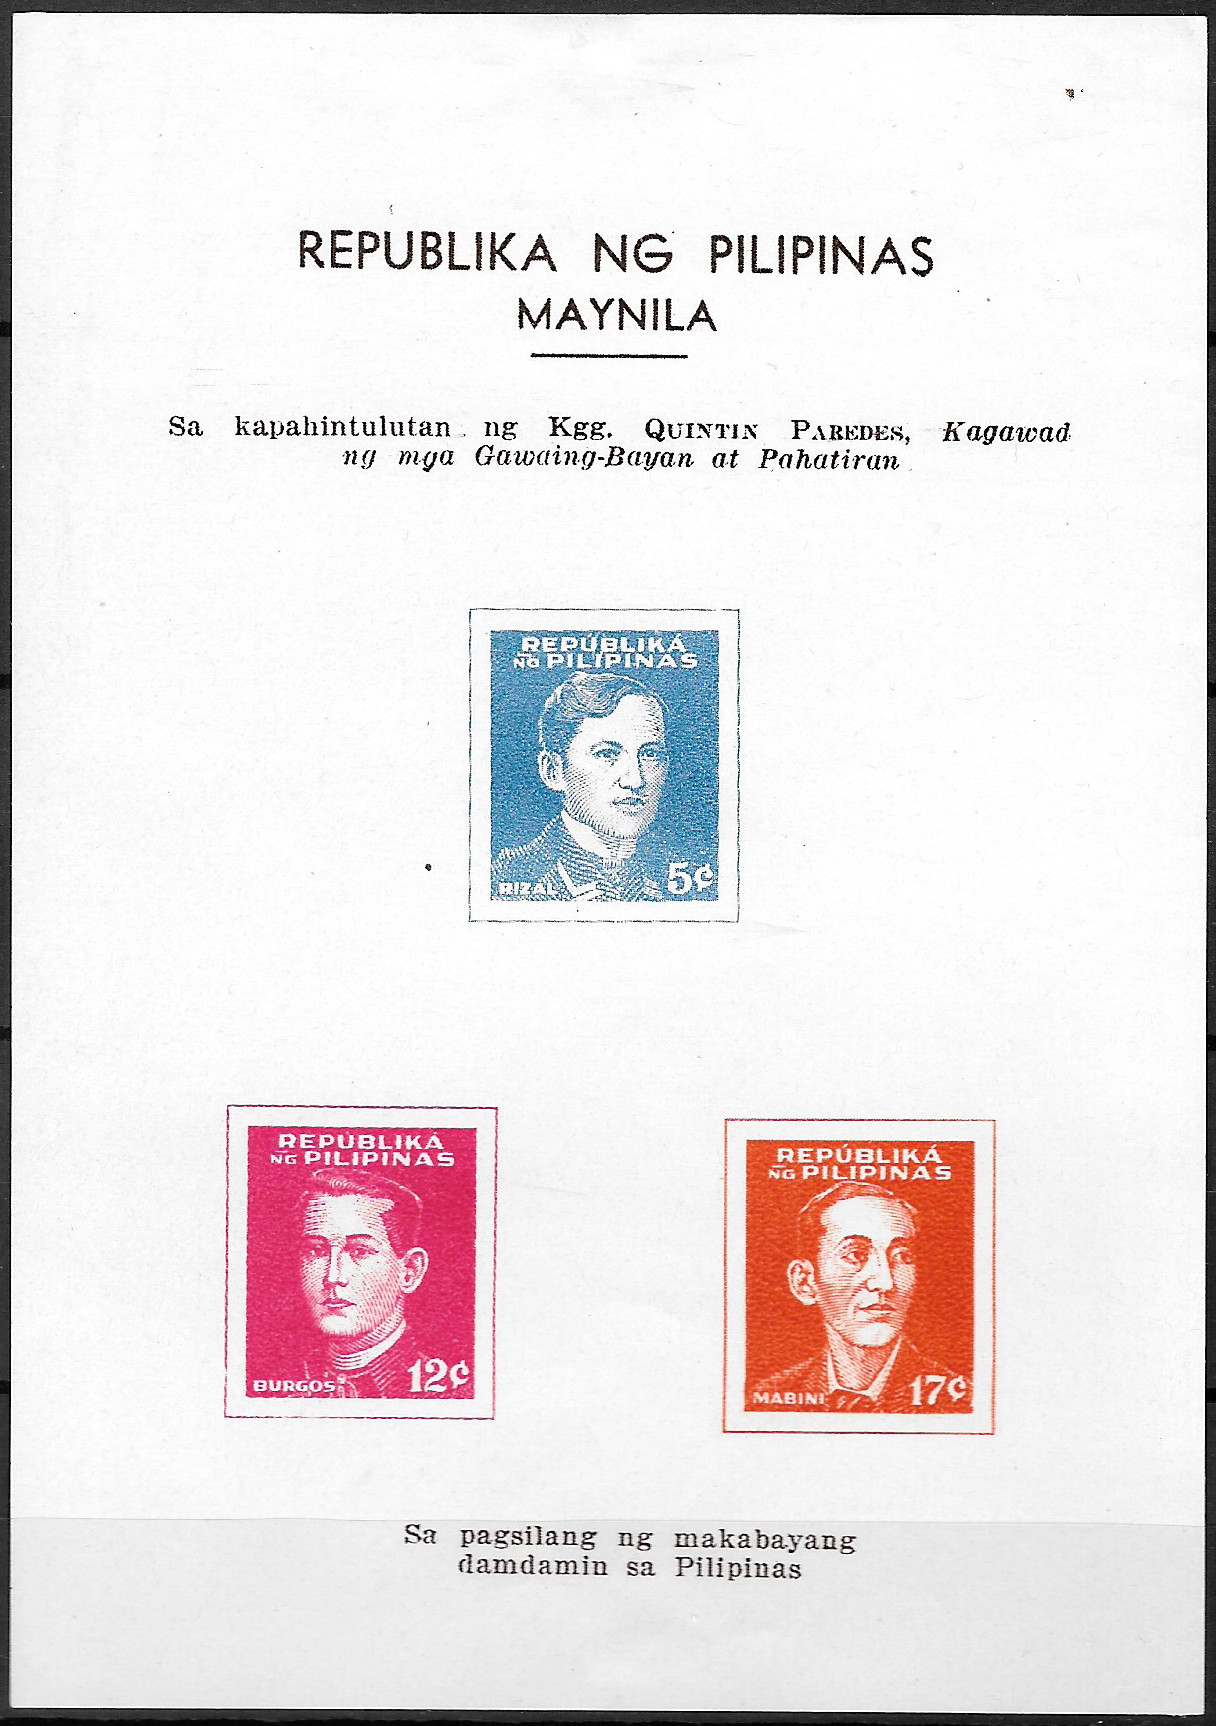 Philippine Semi-Postal Souvenir Sheet from 1944 - National Heroes